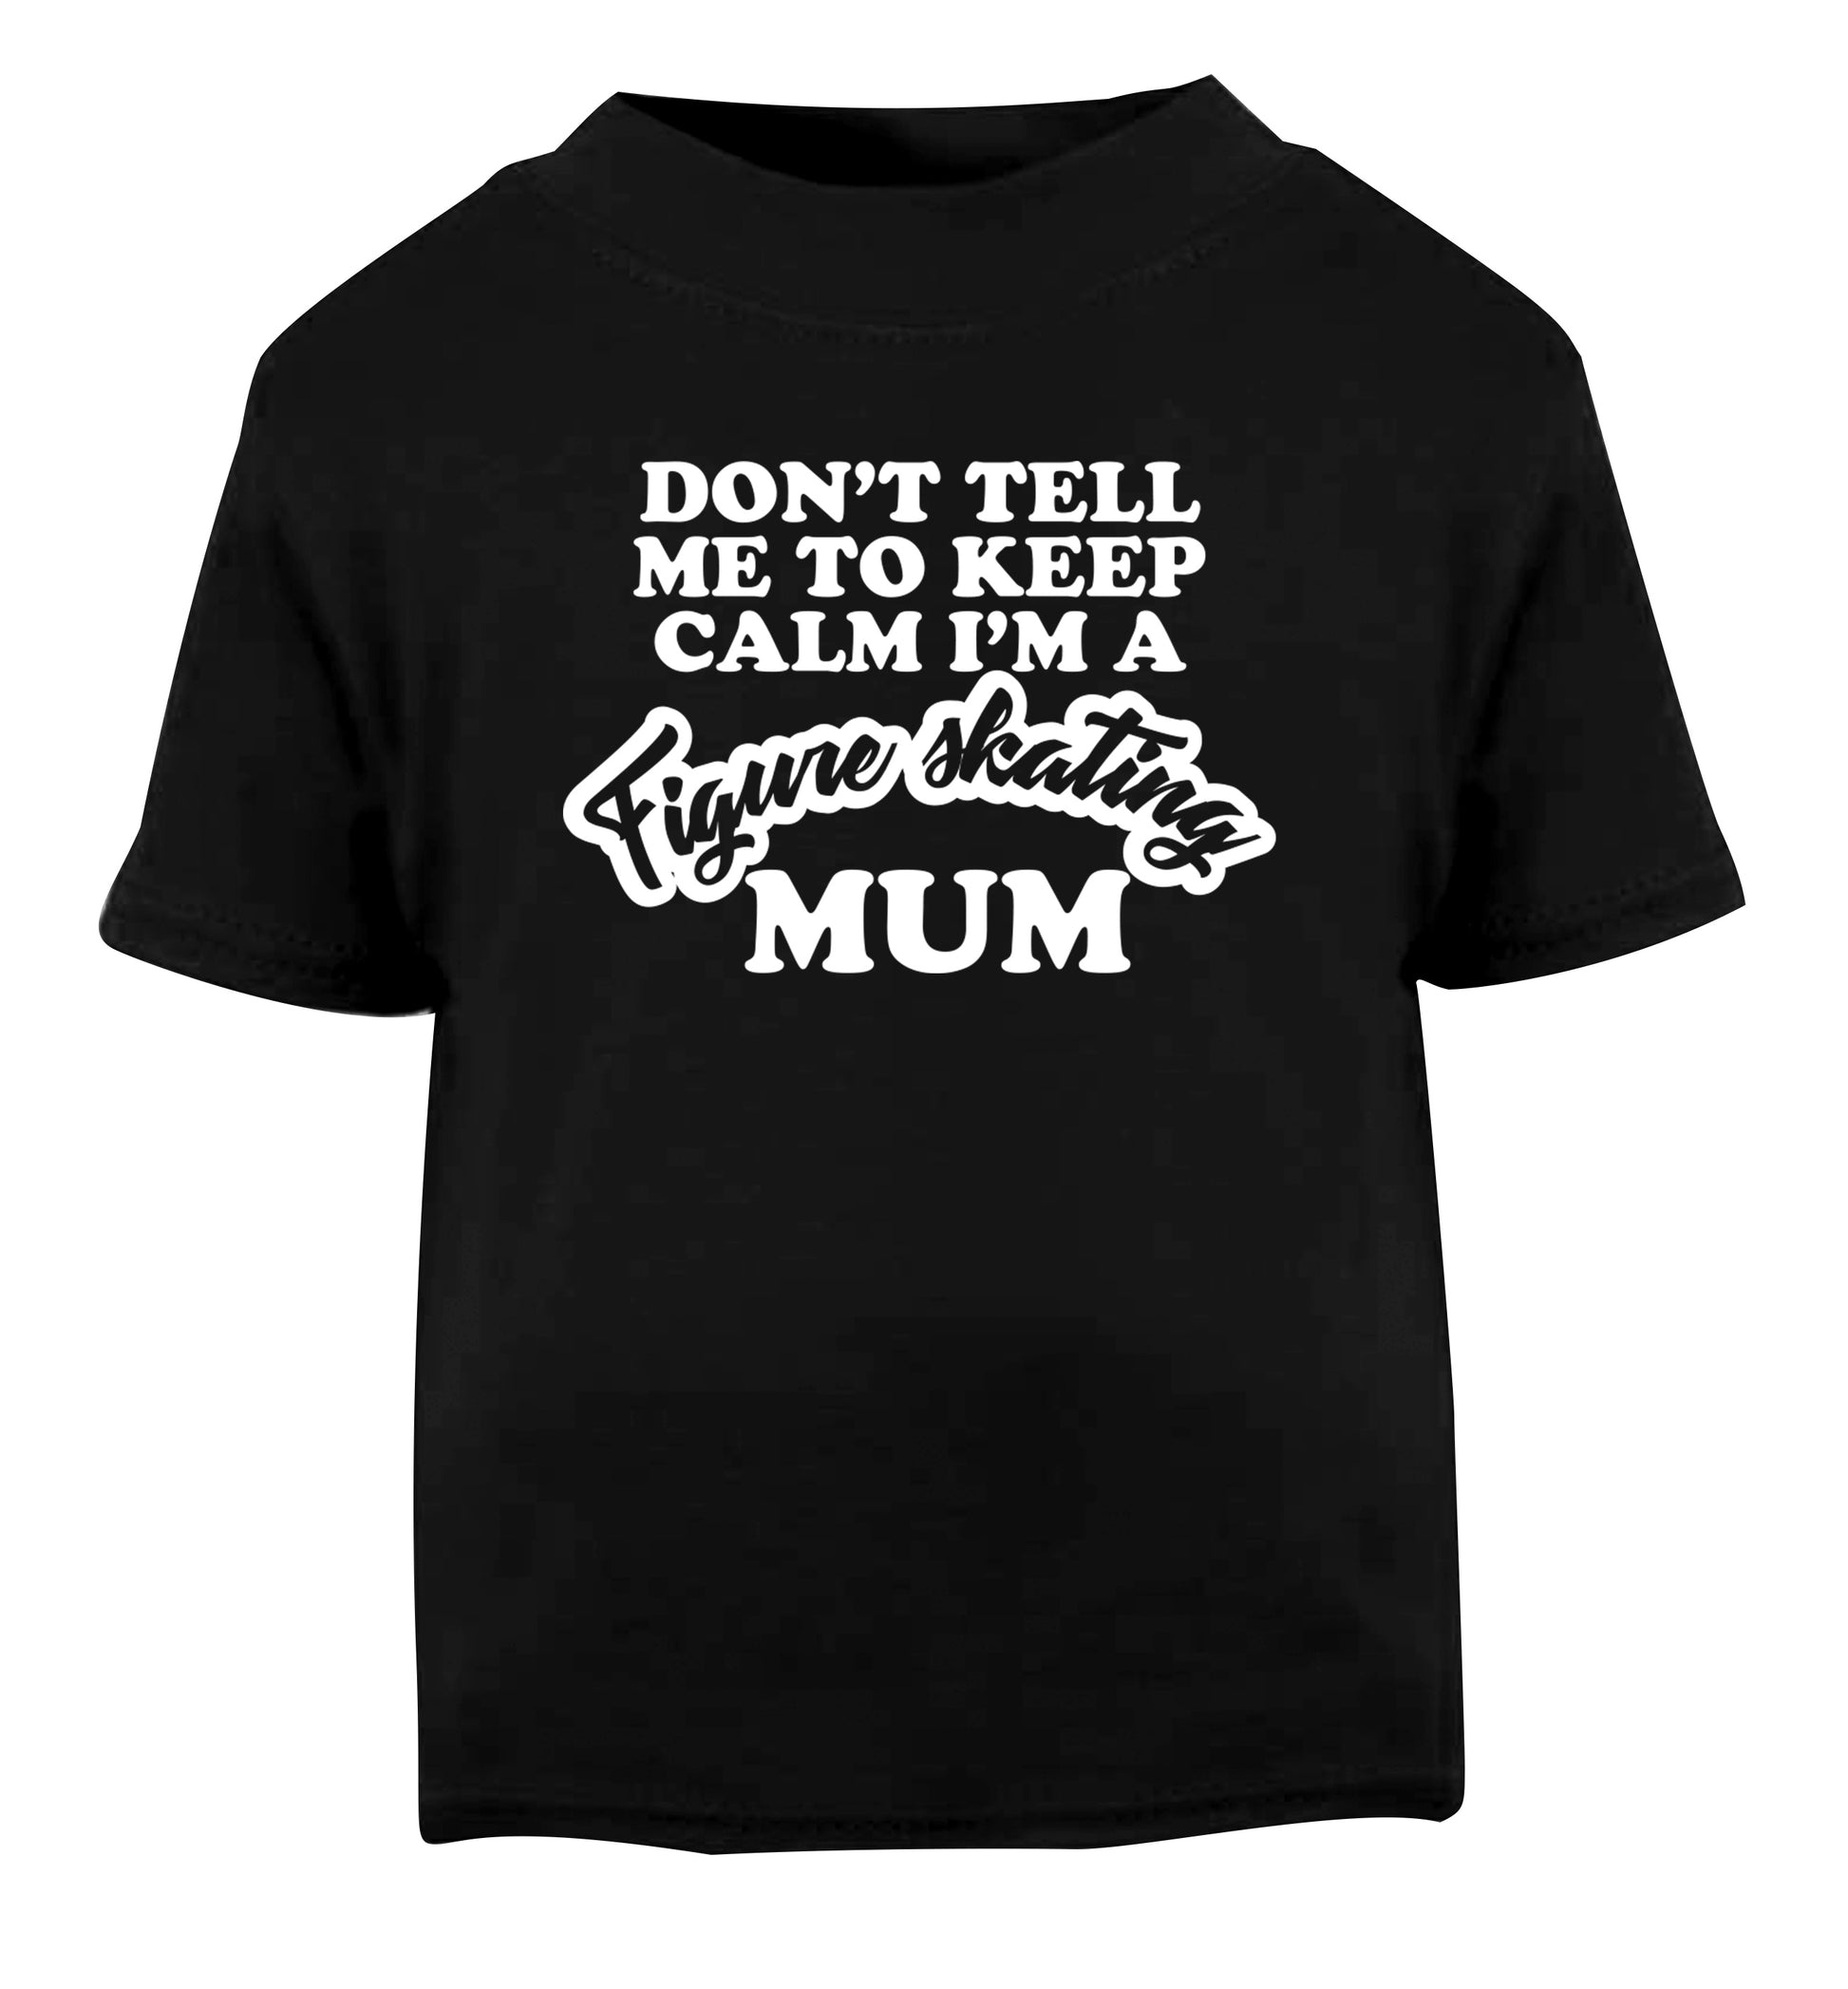 Don't tell me to keep calm I'm a figure skating mum Black Baby Toddler Tshirt 2 years